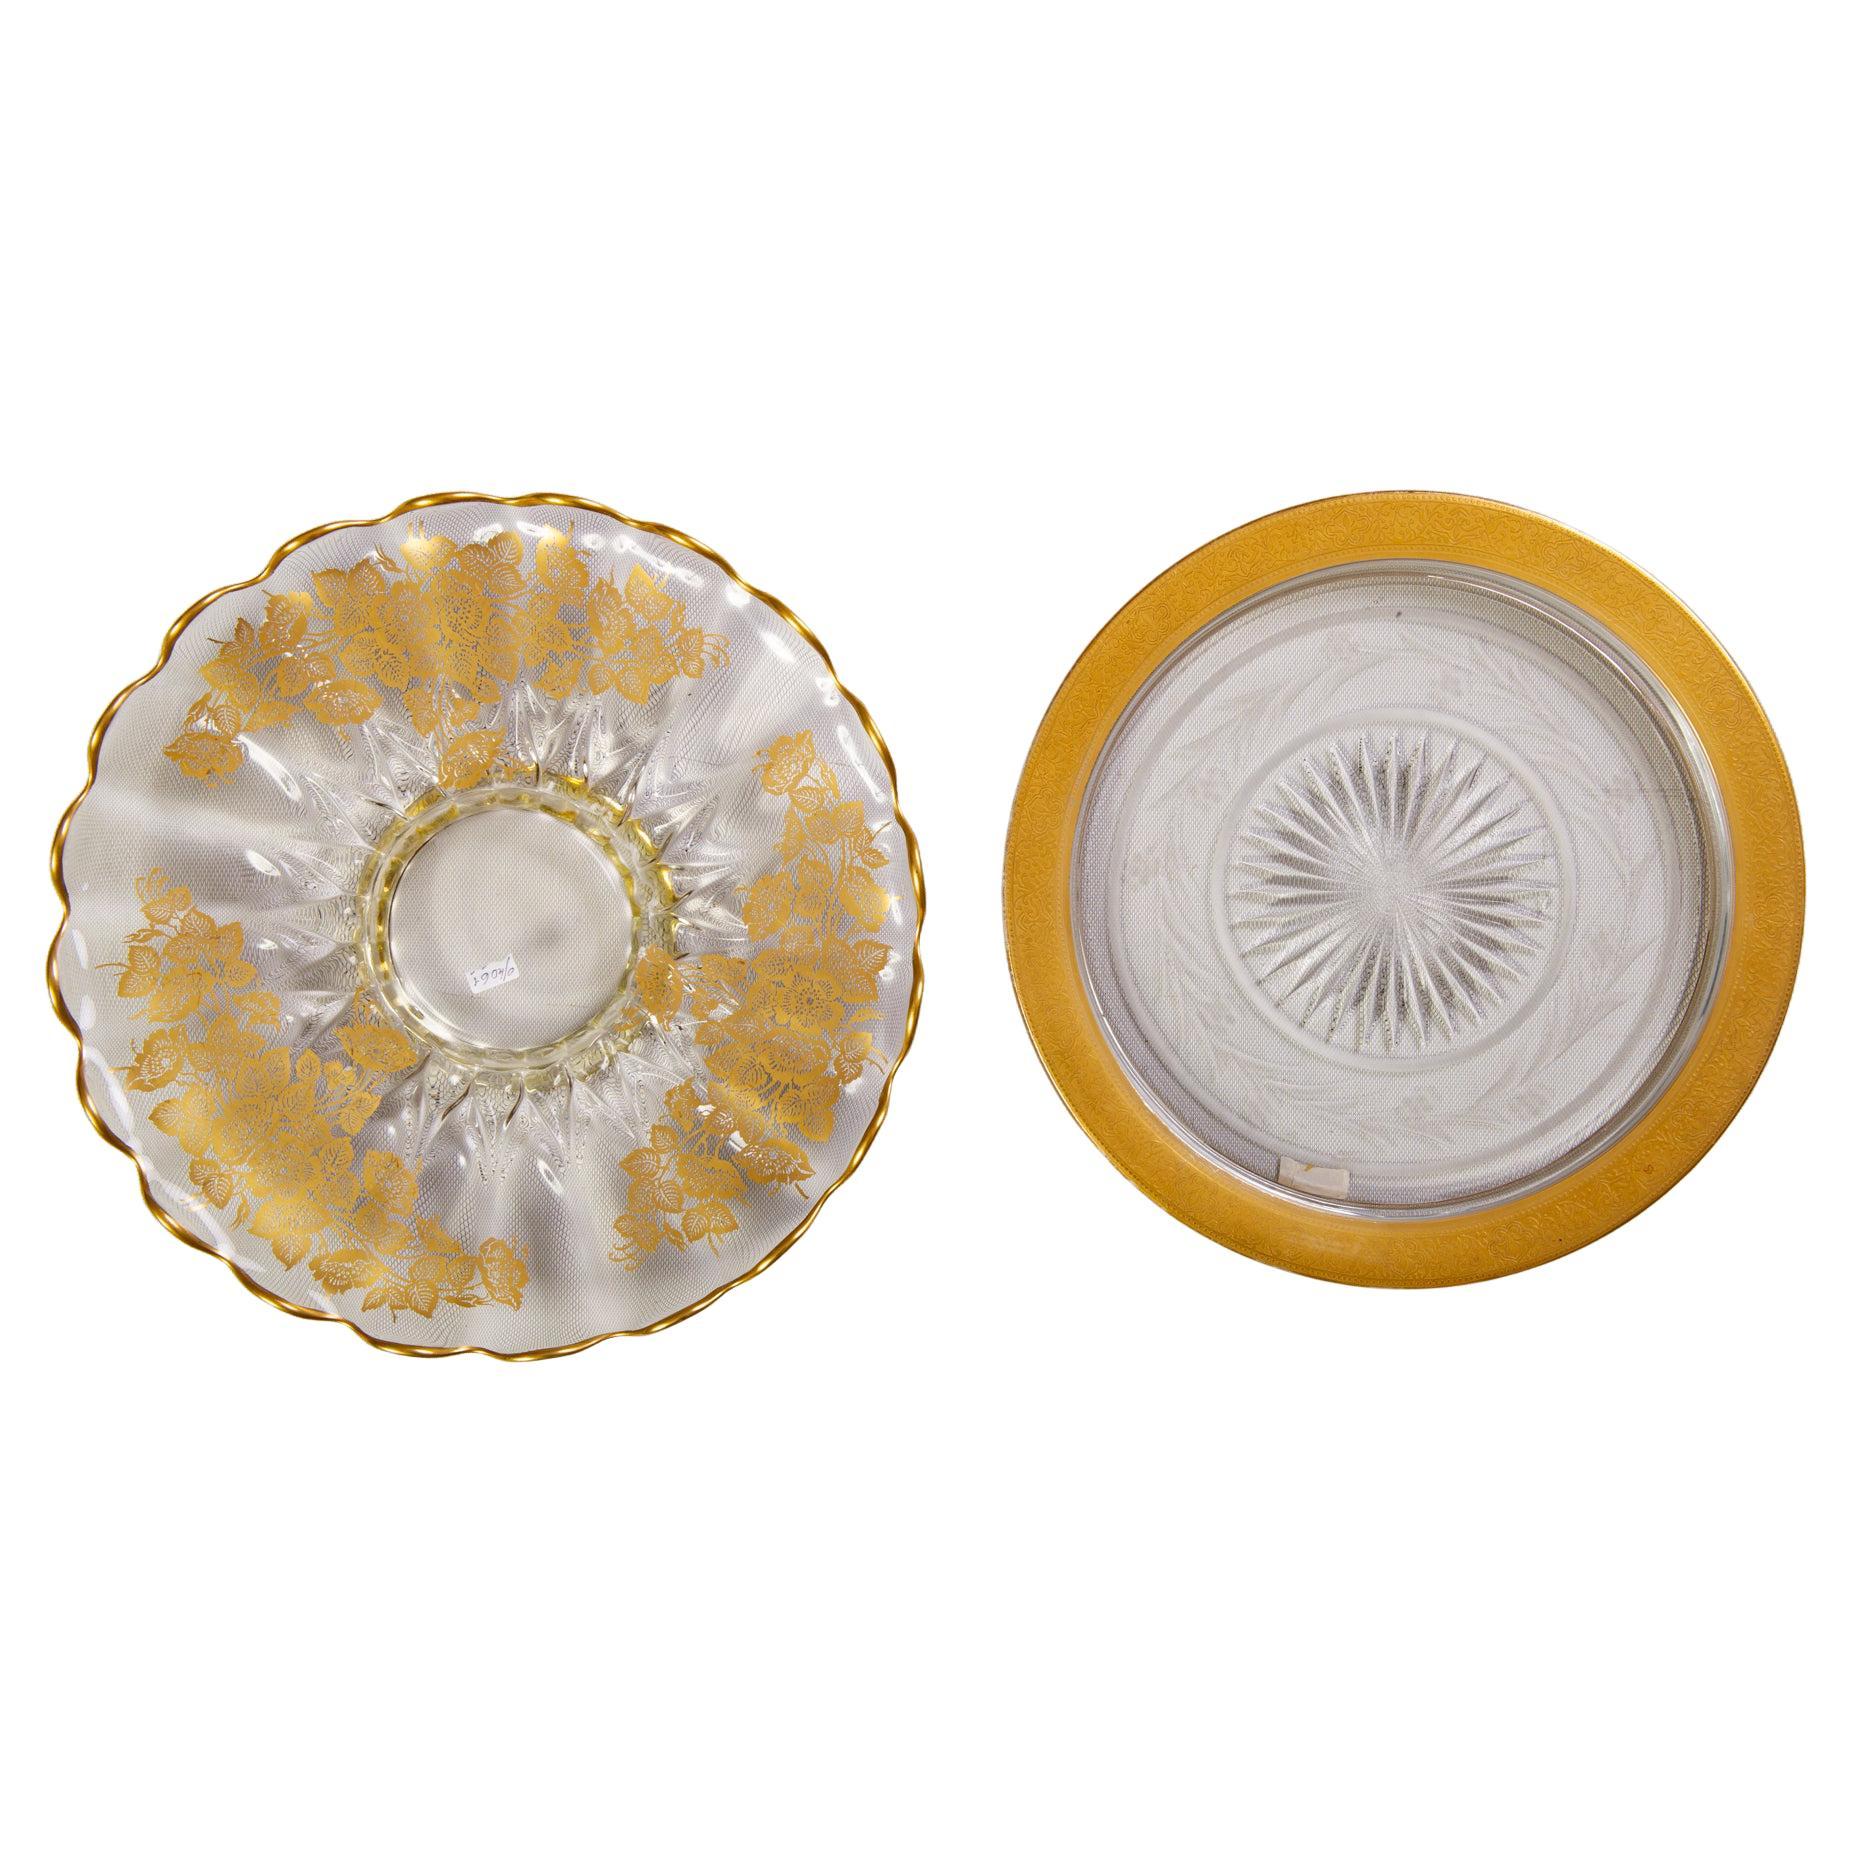 American Glass Plates Printed in Gold in Different Sizes